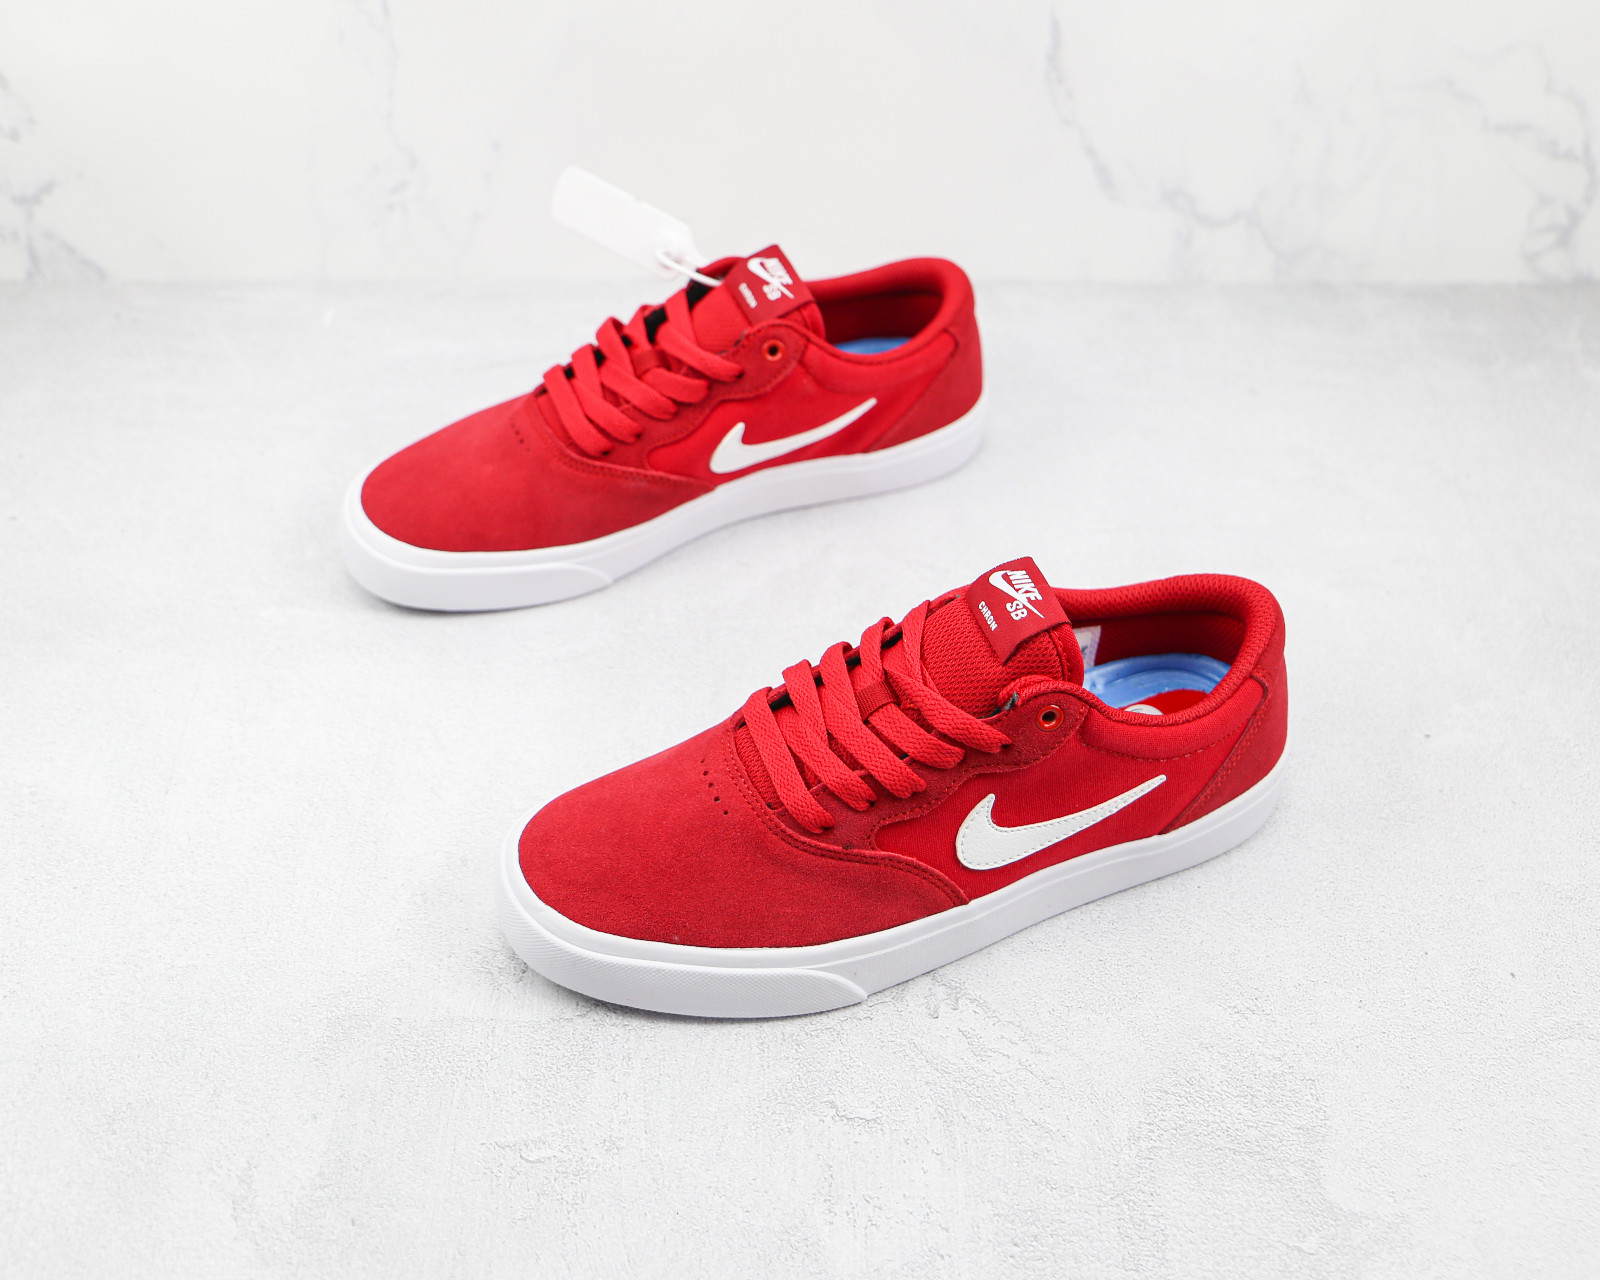 Nike SB Solorsoft Gym Red White Shoes CD6278 - mens new 791 athletic shoes sz 9 5 43 used - GmarShops - 600